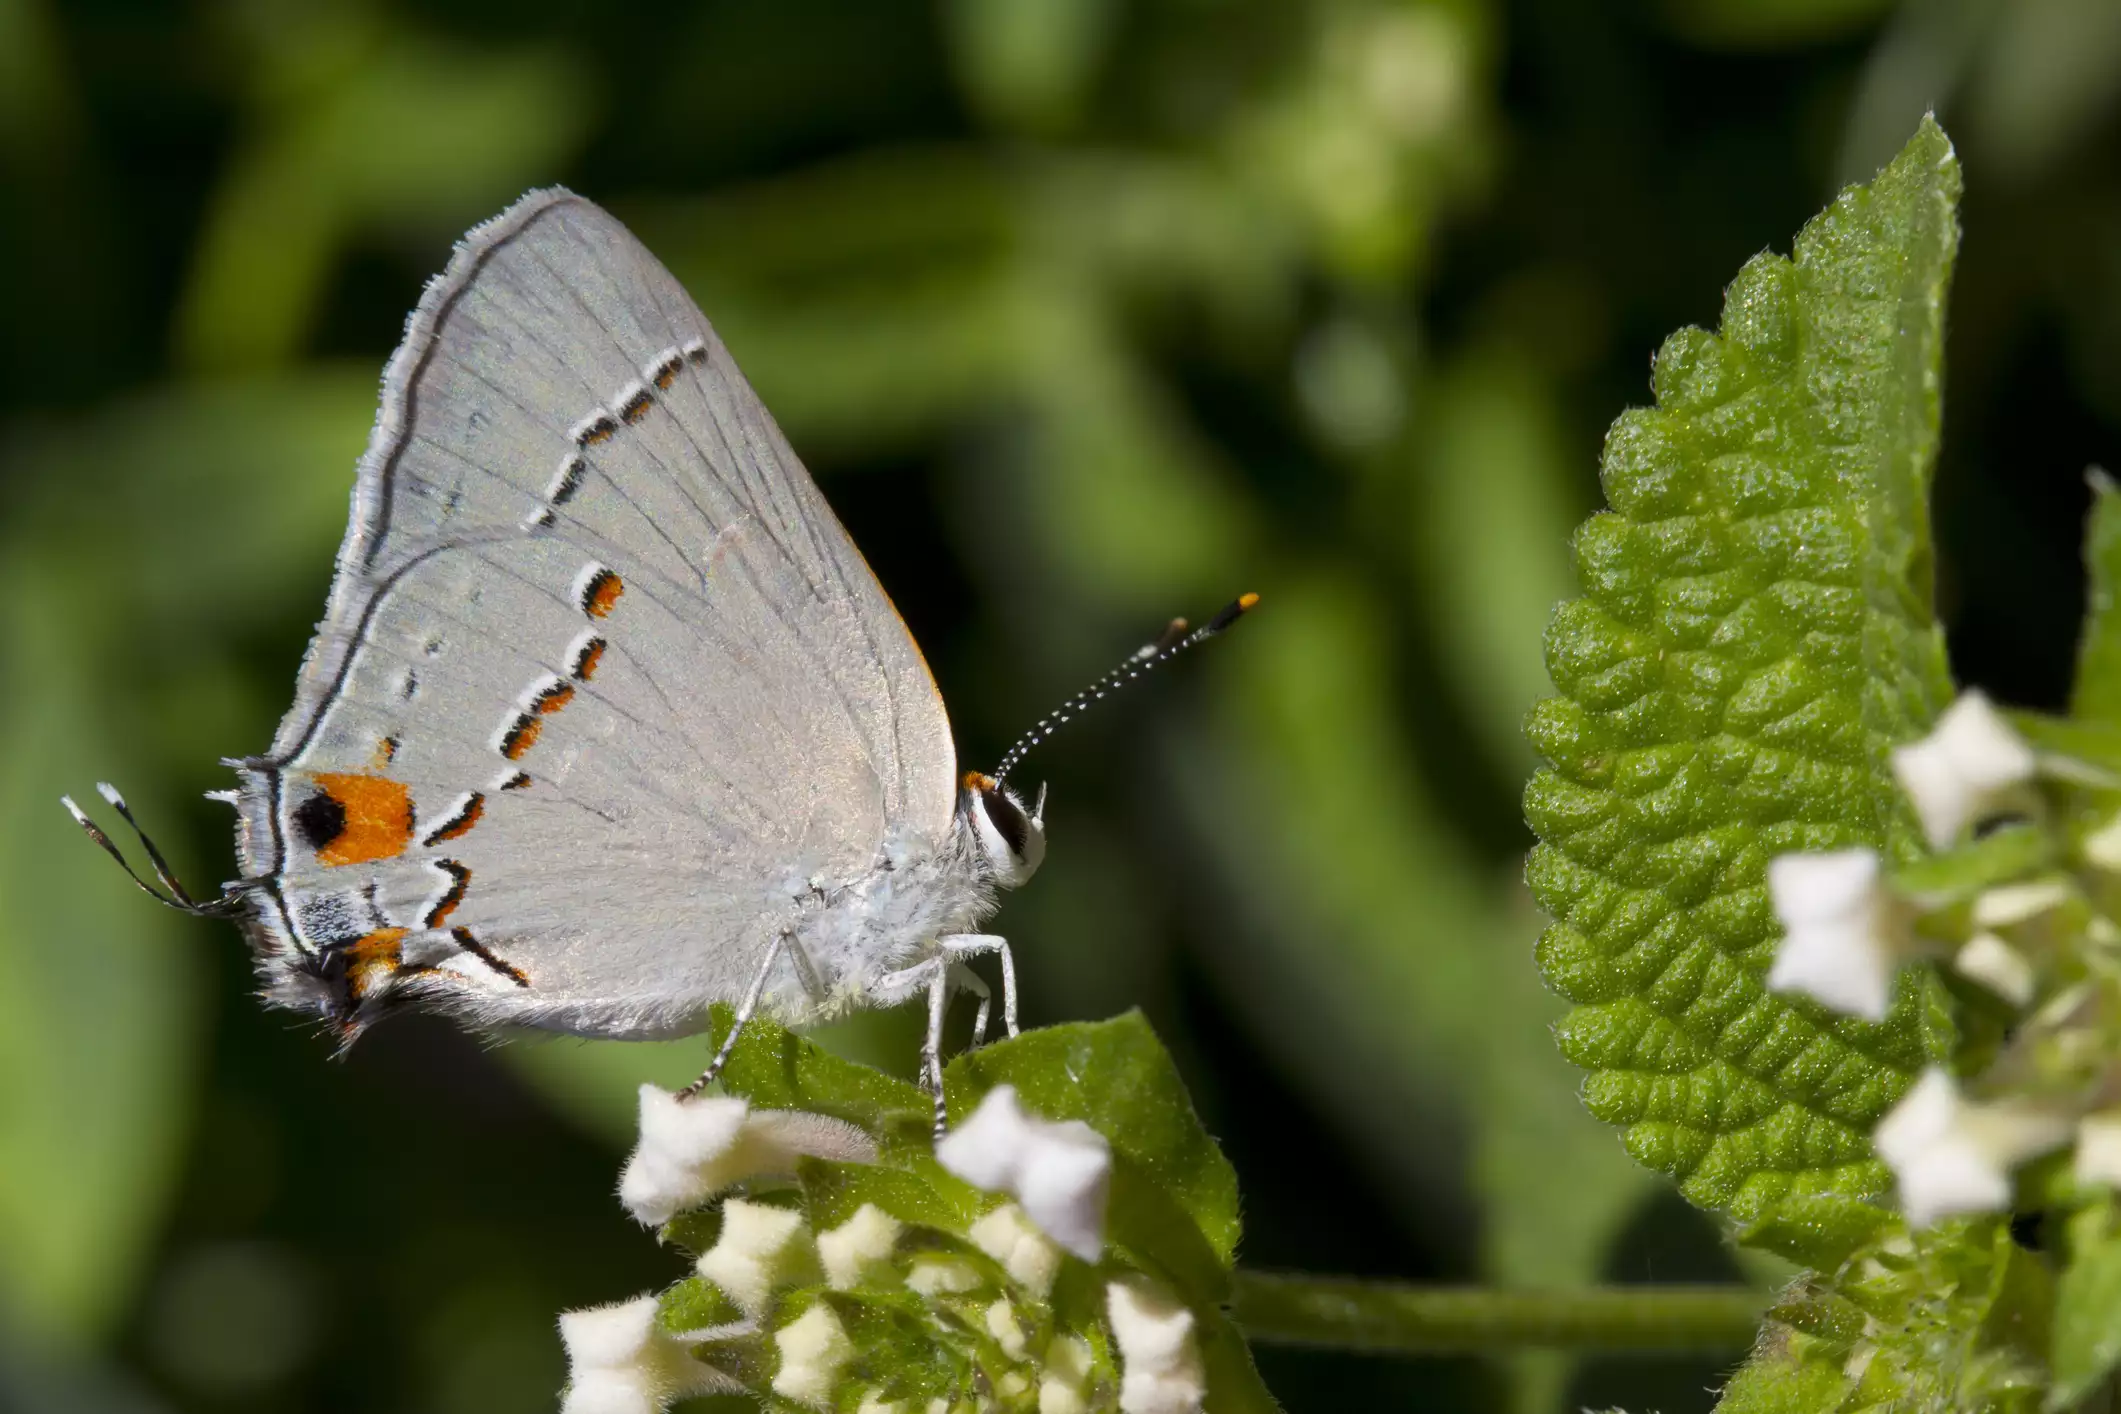 A gray butterfly with markings that resemble a body on the rear of its wings